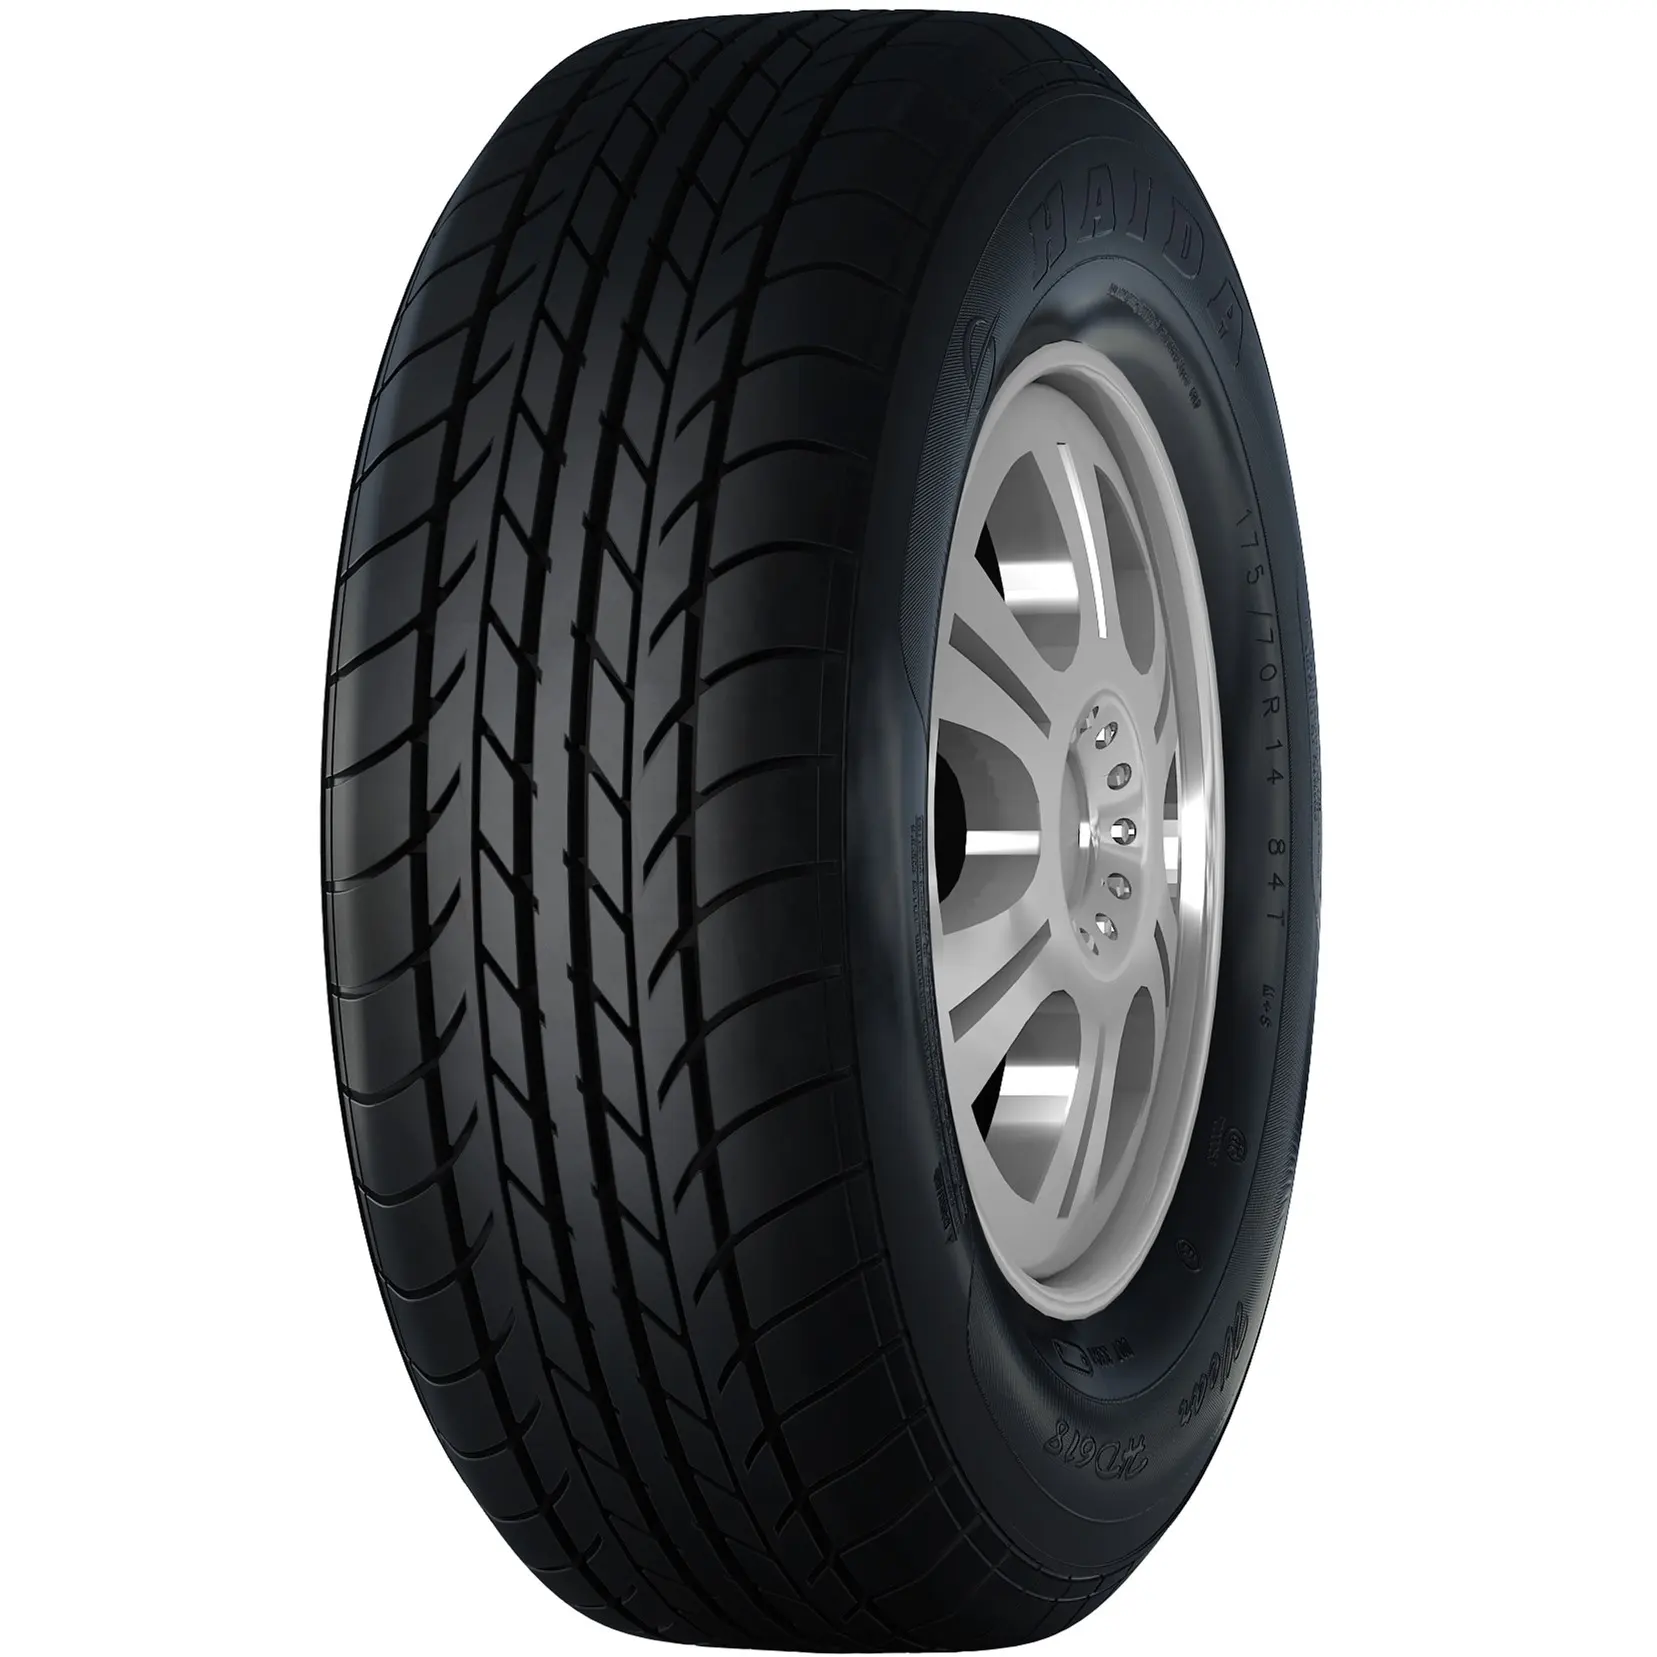 4x4 tyres Chinese famous brand car tyre 185/65R15 pcr machine buy tires online